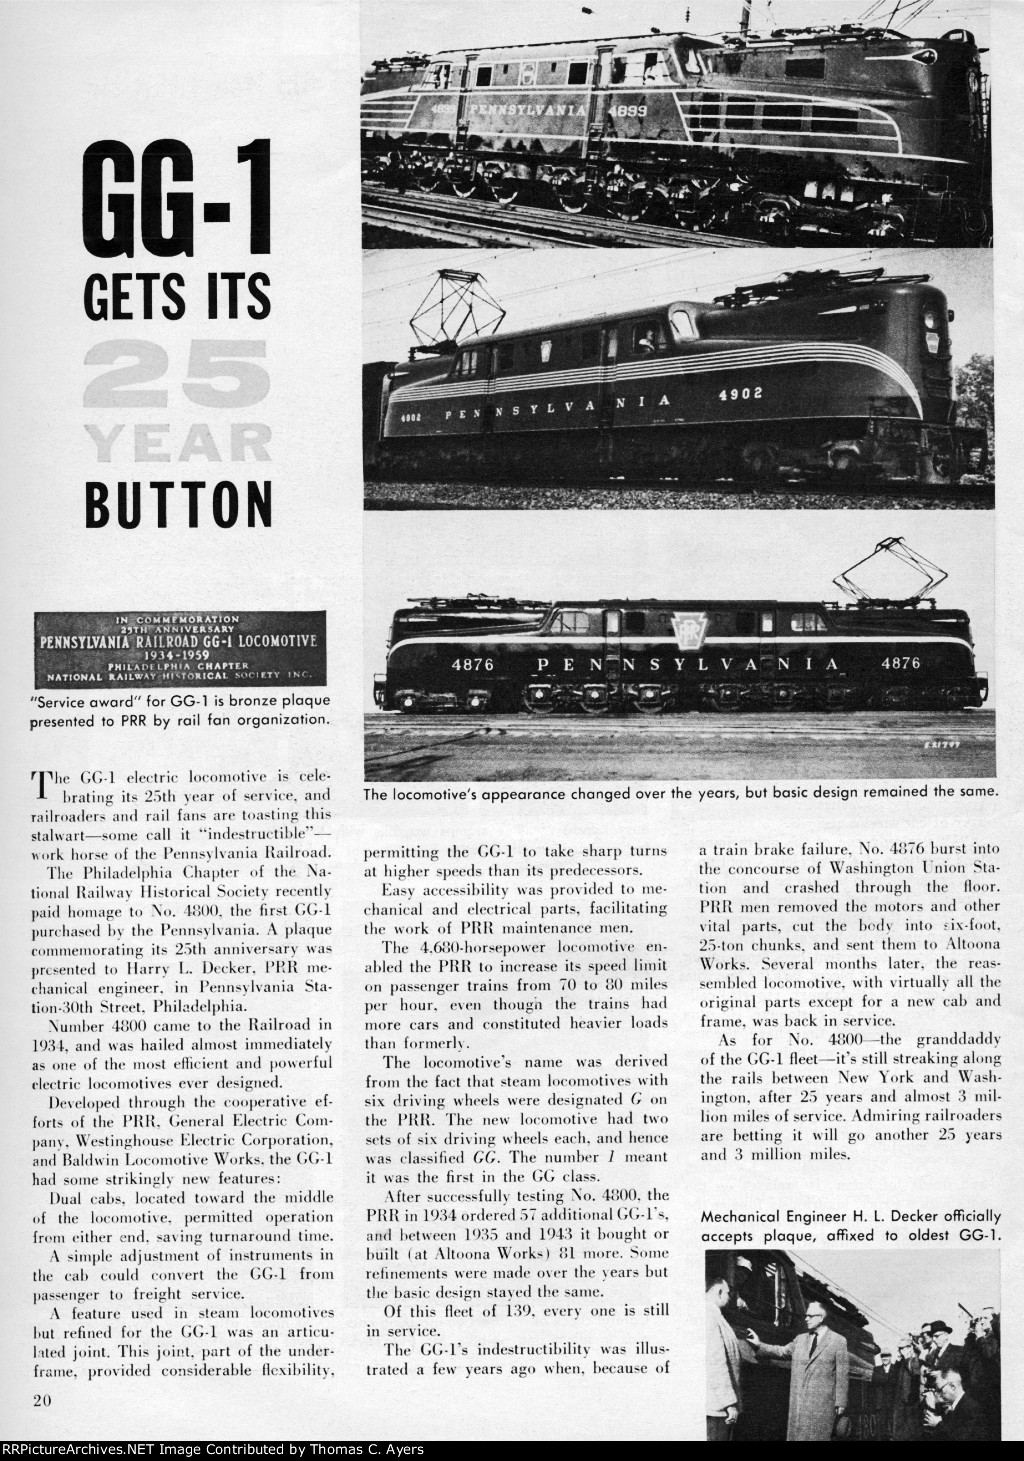 "GG-1 Gets Its 25 Year Button," Page 20, 1959